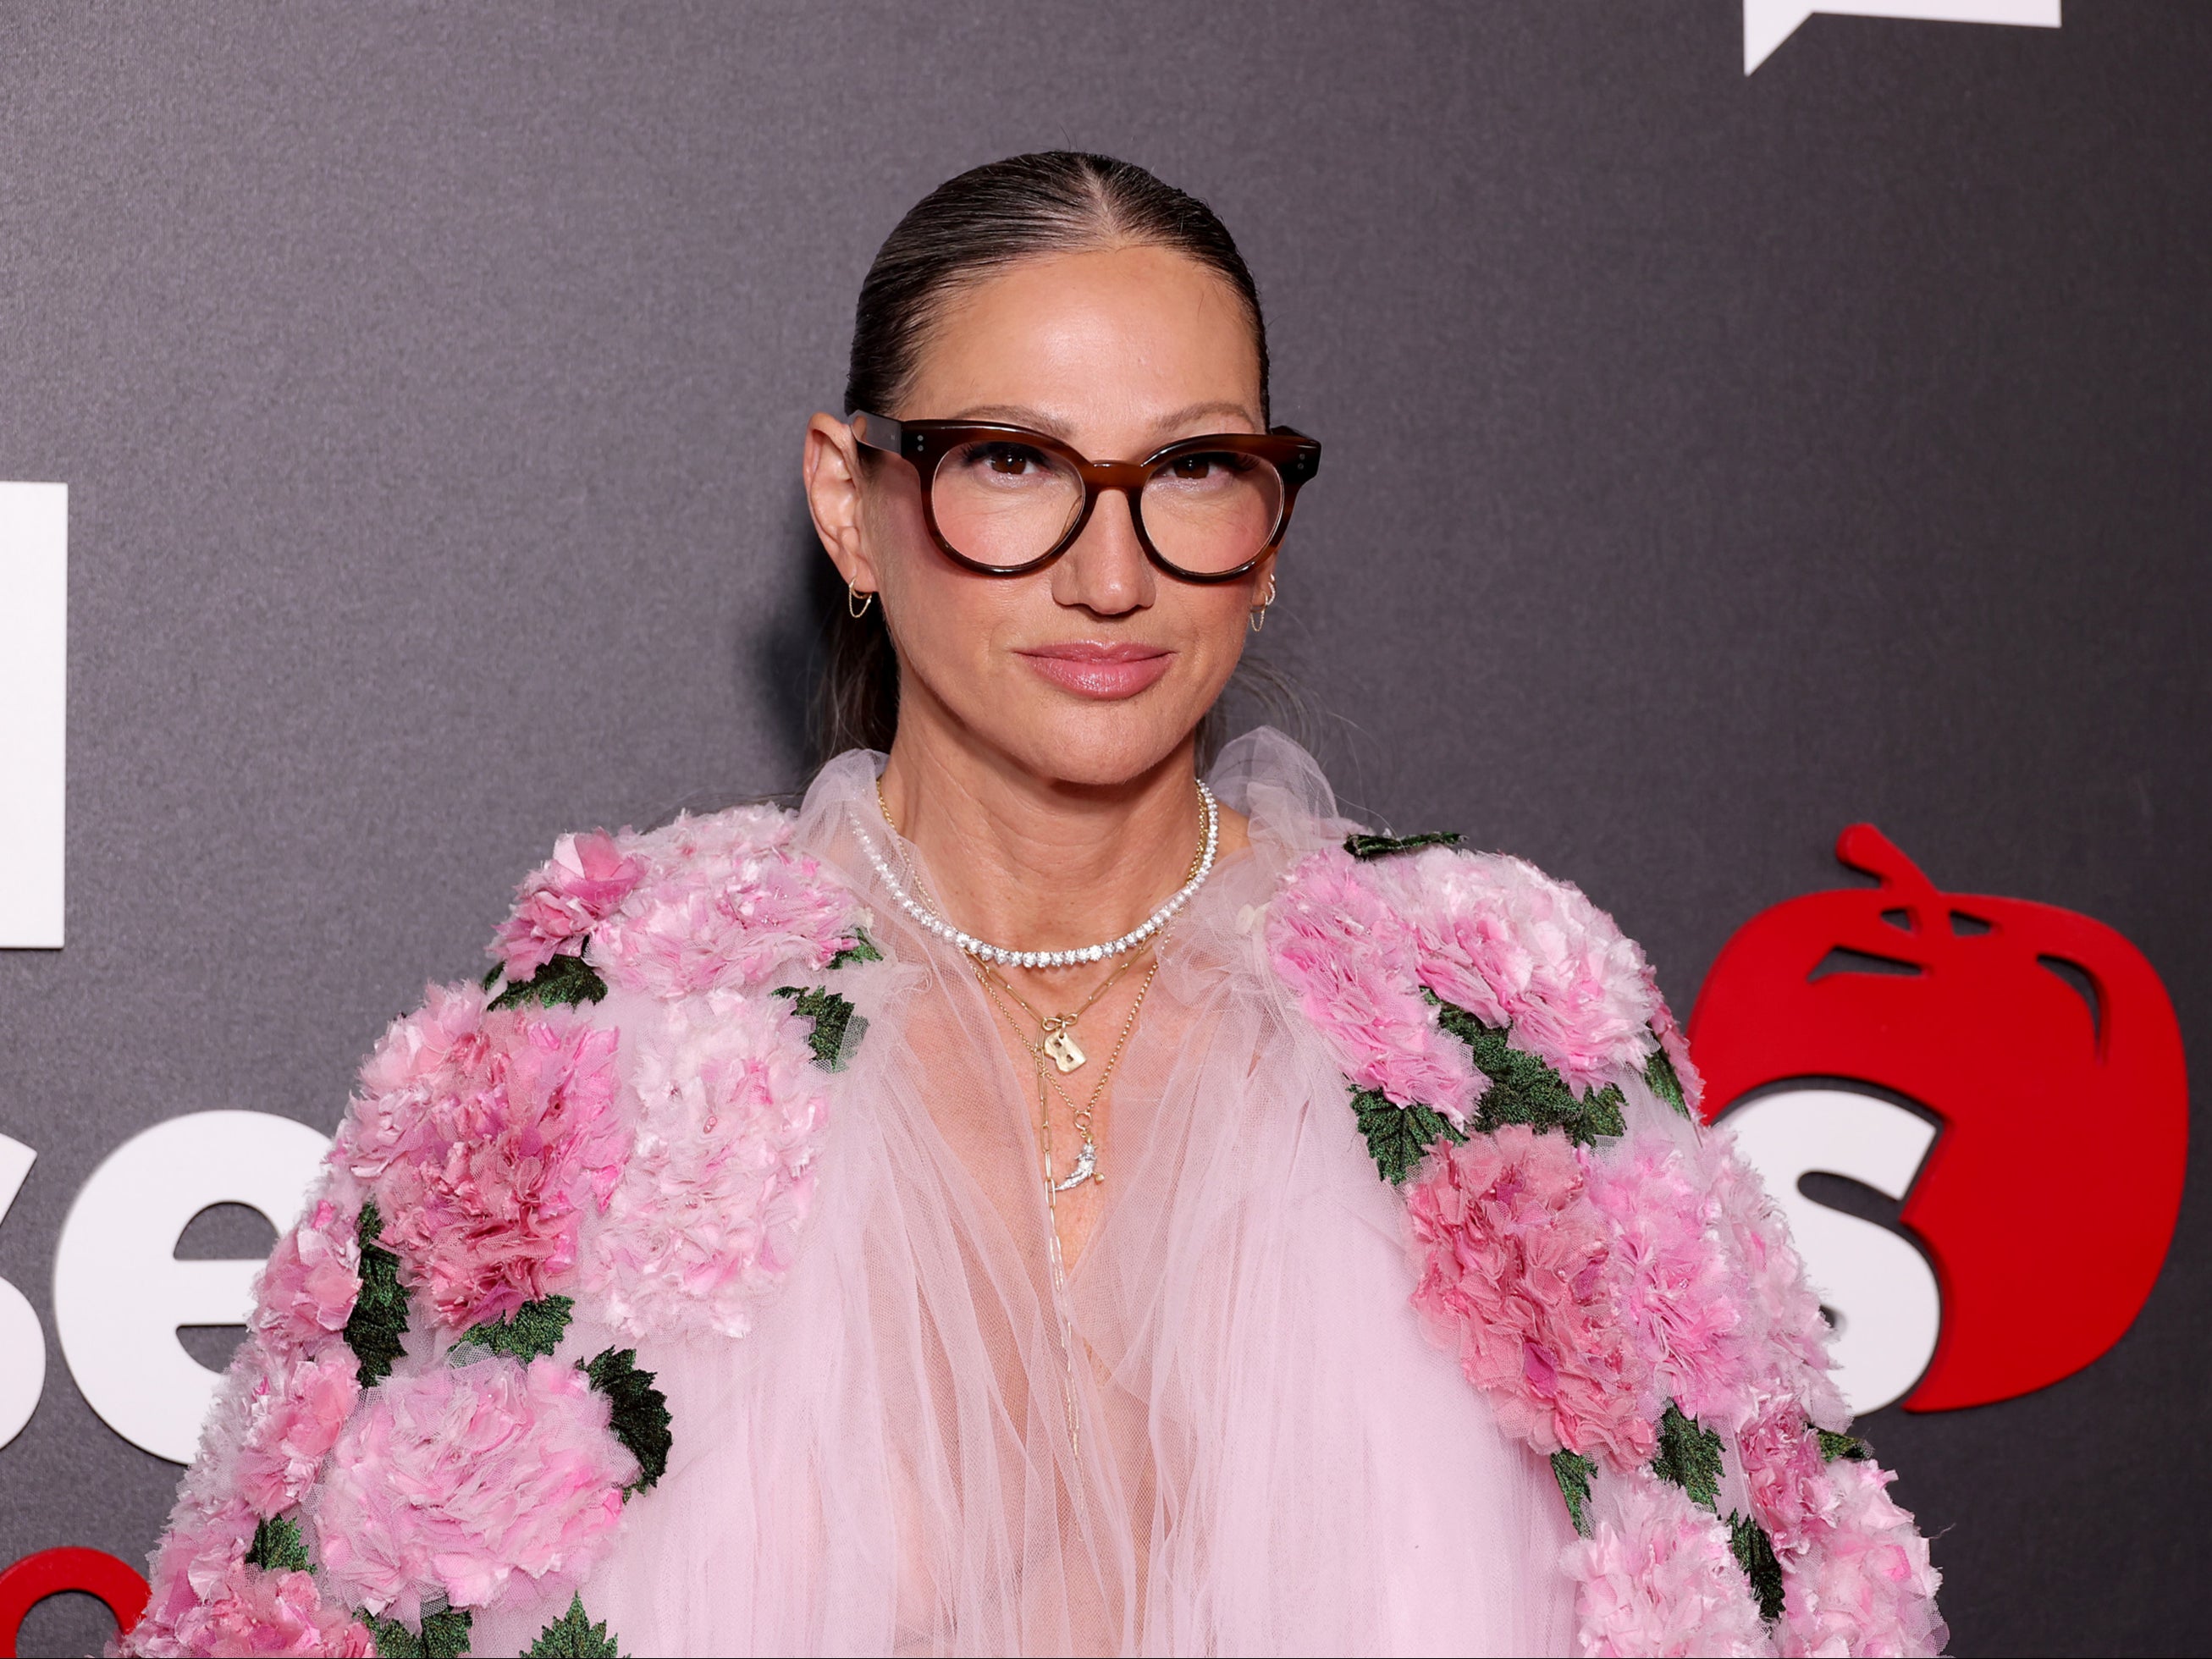 Jenna Lyons says her hair and teeth are fake because of genetic disorder The Independent pic